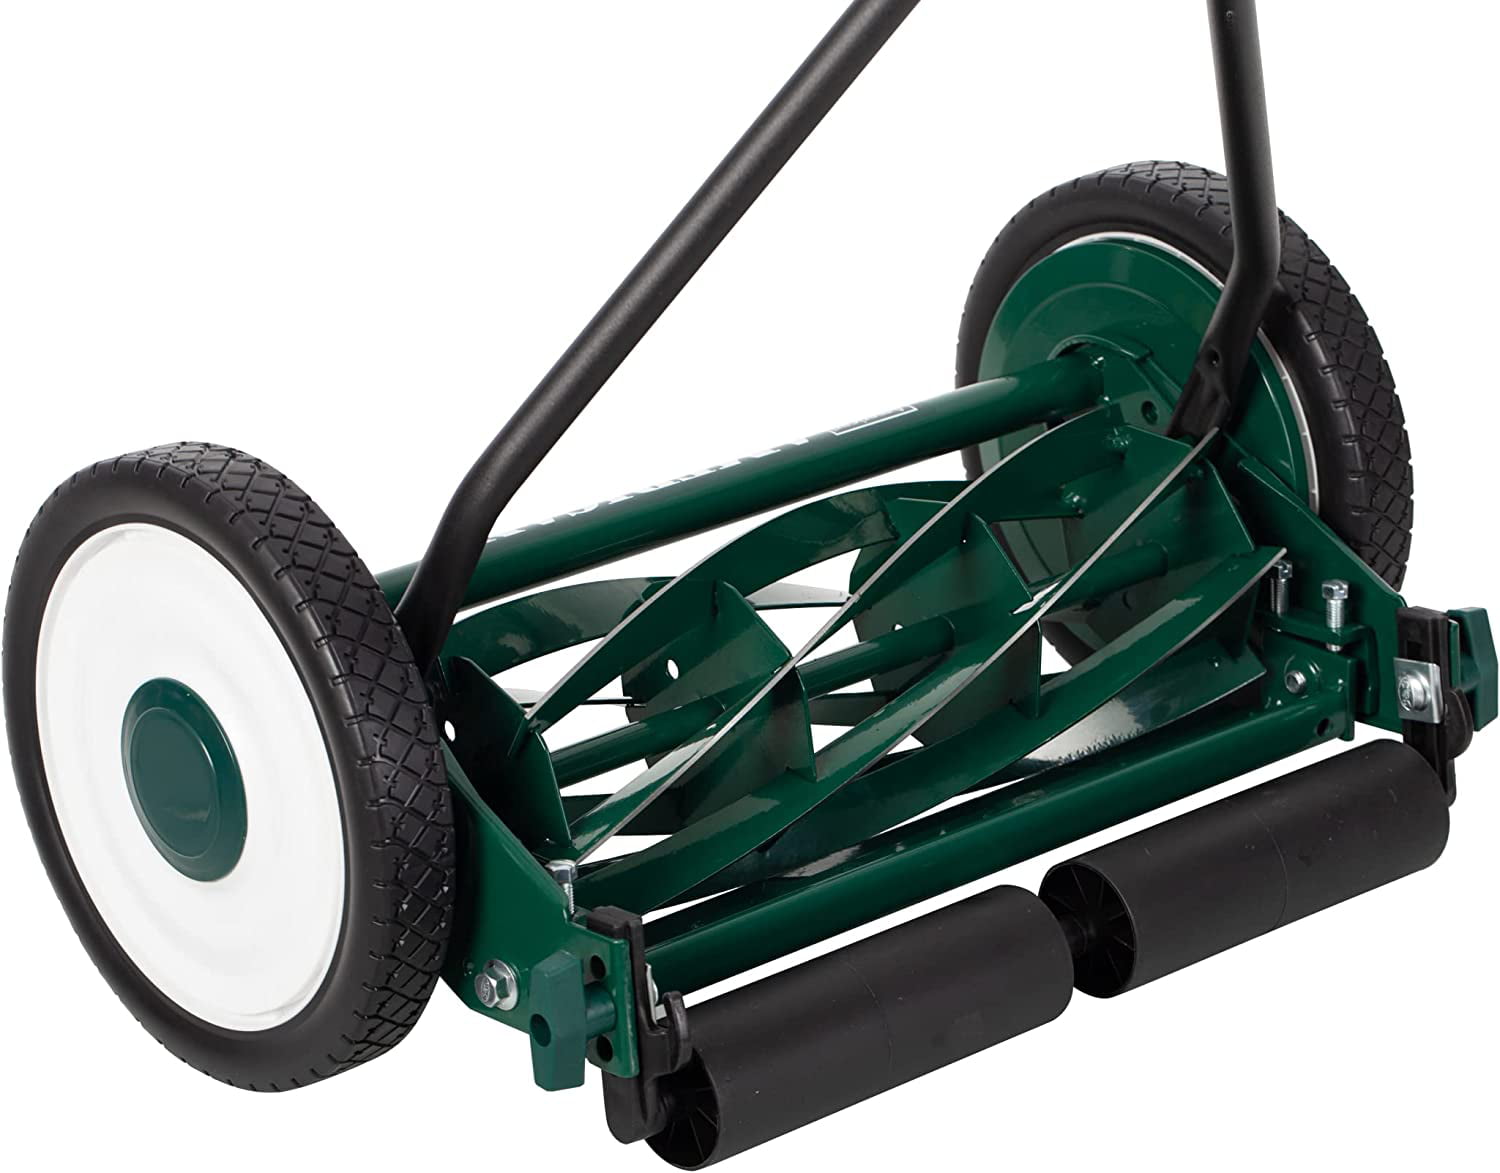 American Lawn Mower Company 1725-16GC 16-inch 7-Blade Reel Mower with Grass Catcher